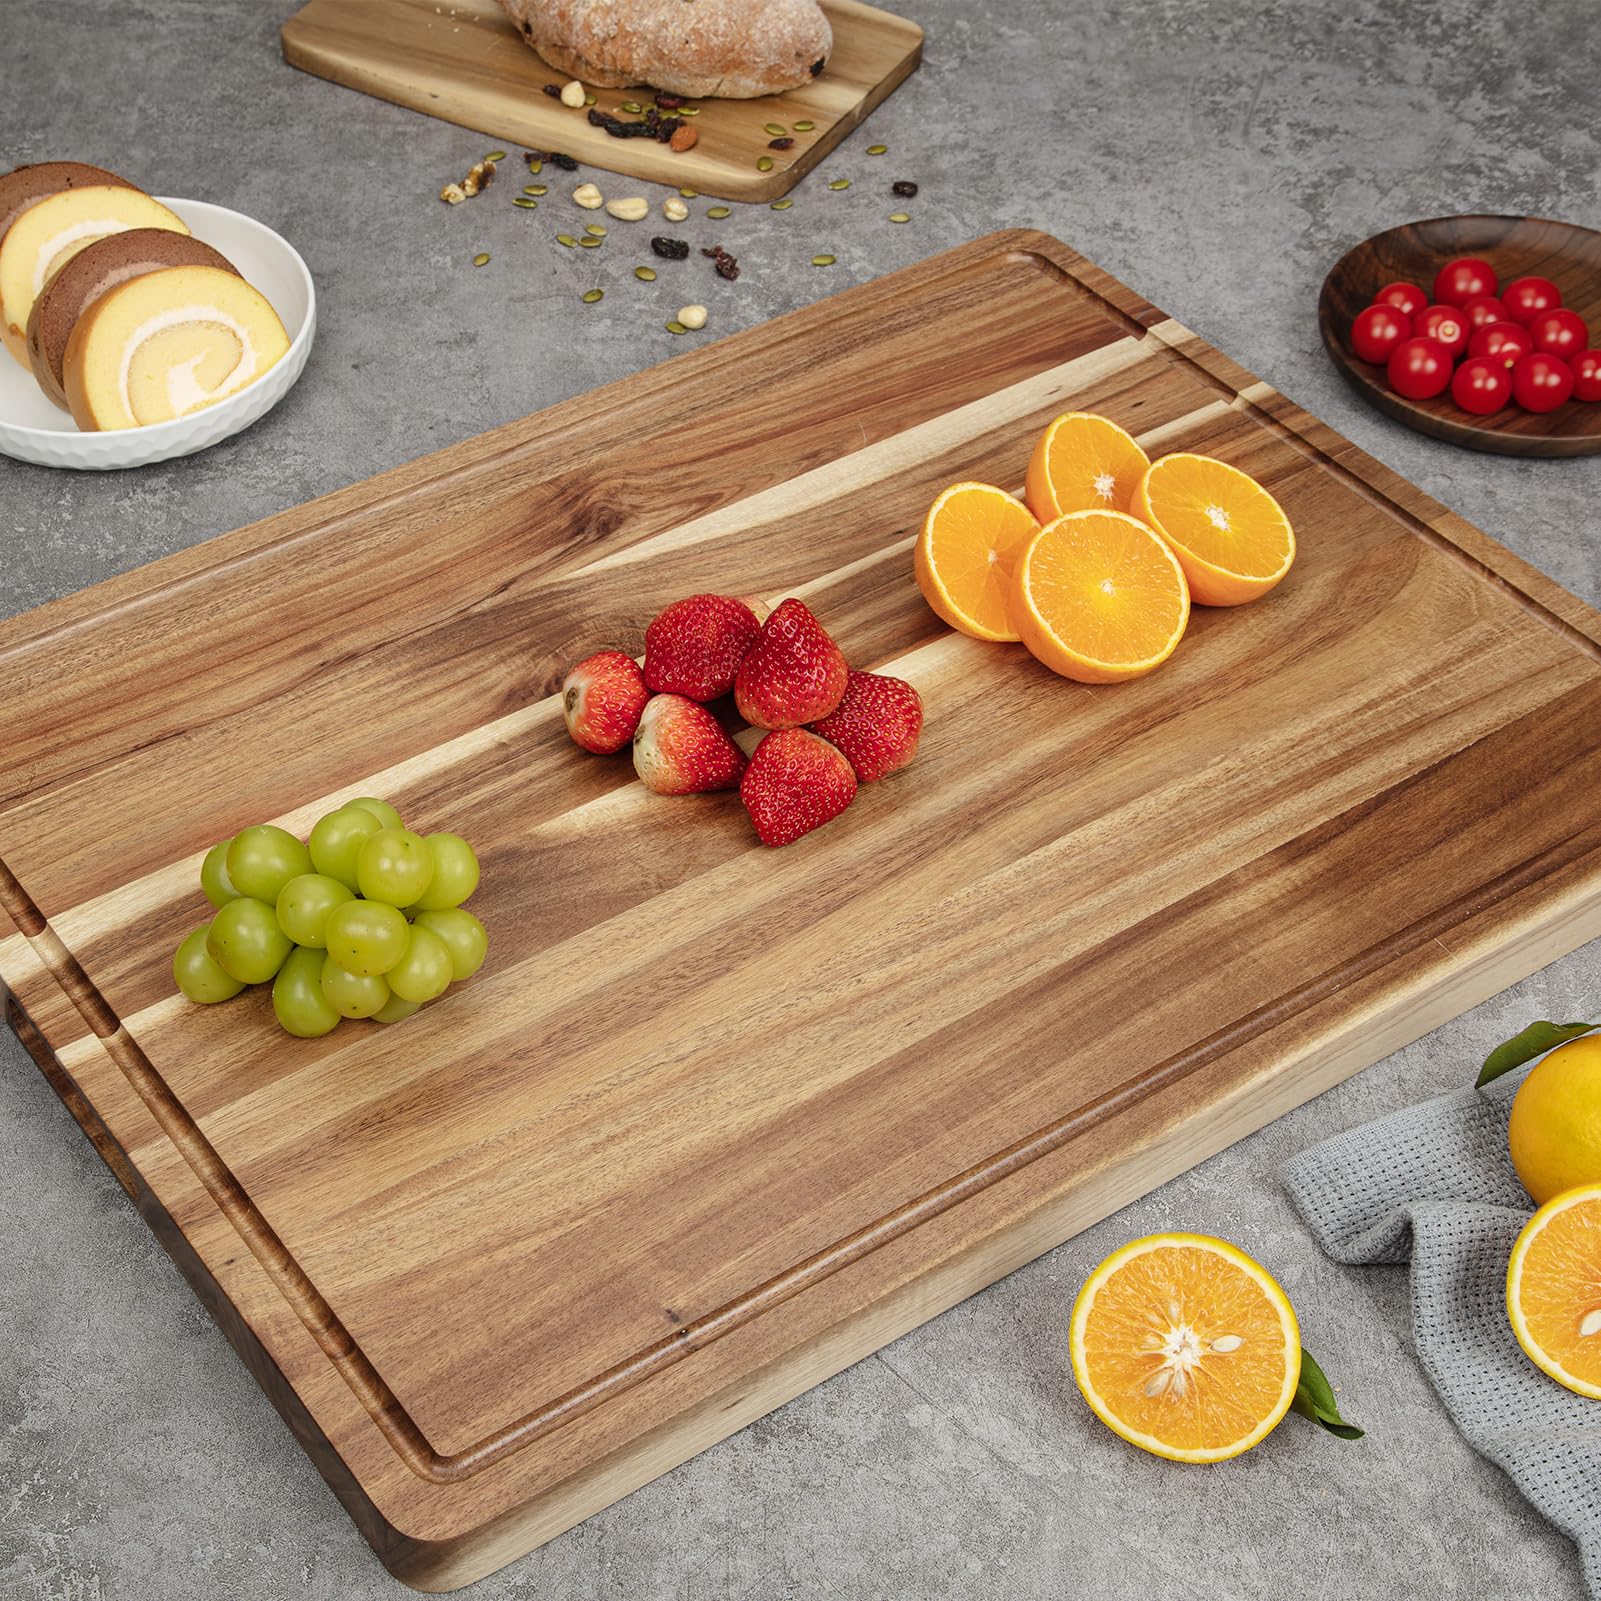 Glowsol Large Acacia Wood Cutting Board, 24 x 18 Inch Extra Large Wood Cutting Board For Kitchen With Side Handles And Juice Slot, Reversible Butcher Block Cutting Board For Meat And Veggies